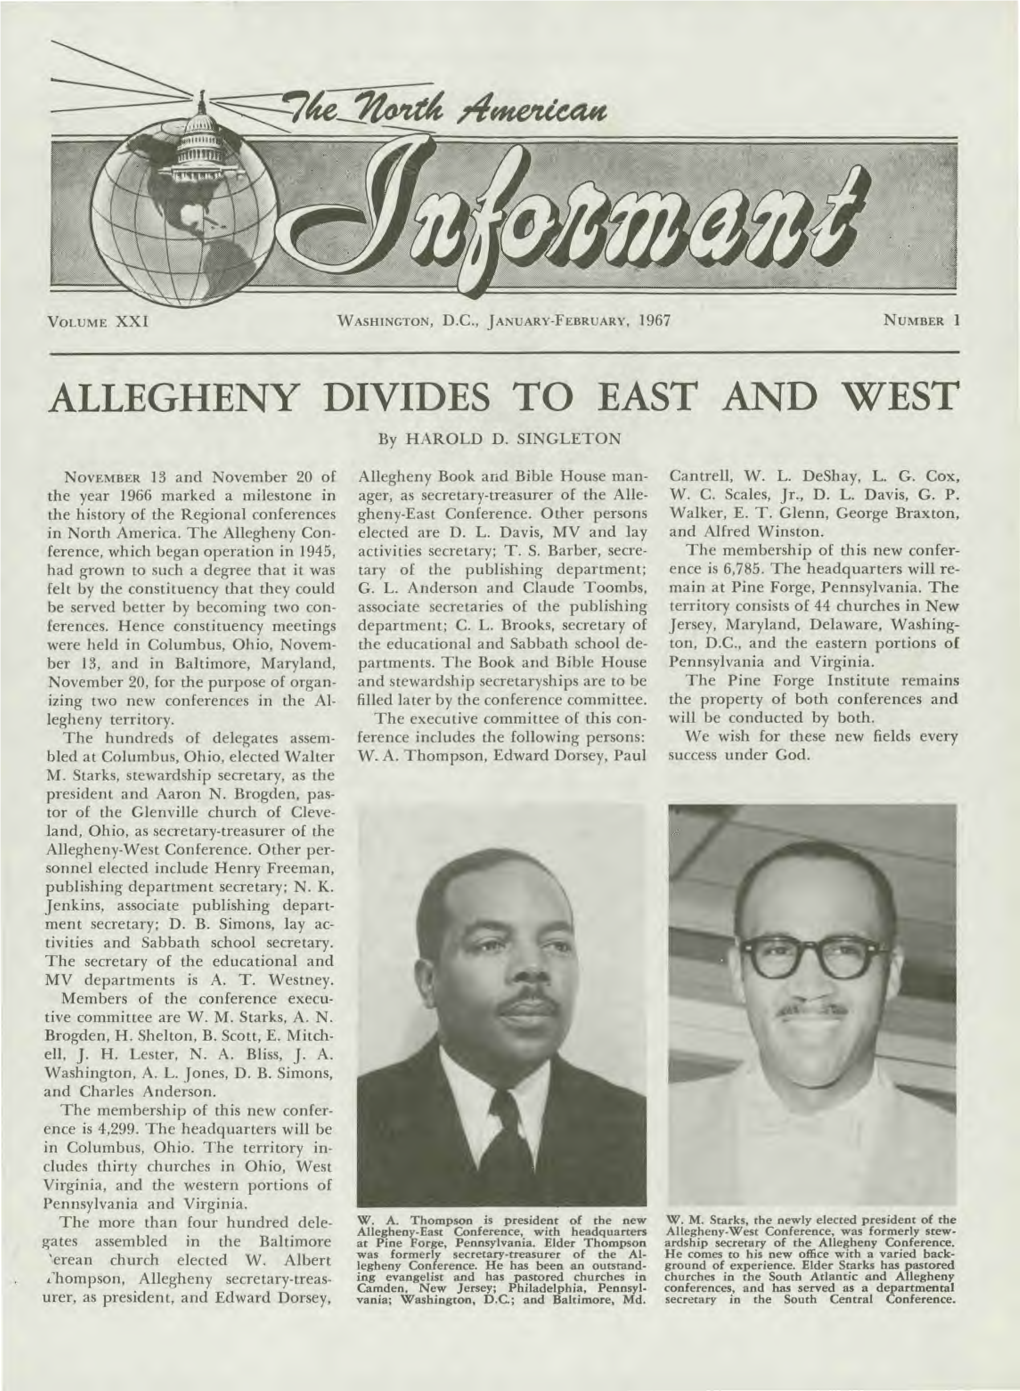 ALLEGHENY DIVIDES to EAST and WEST by HAROLD D